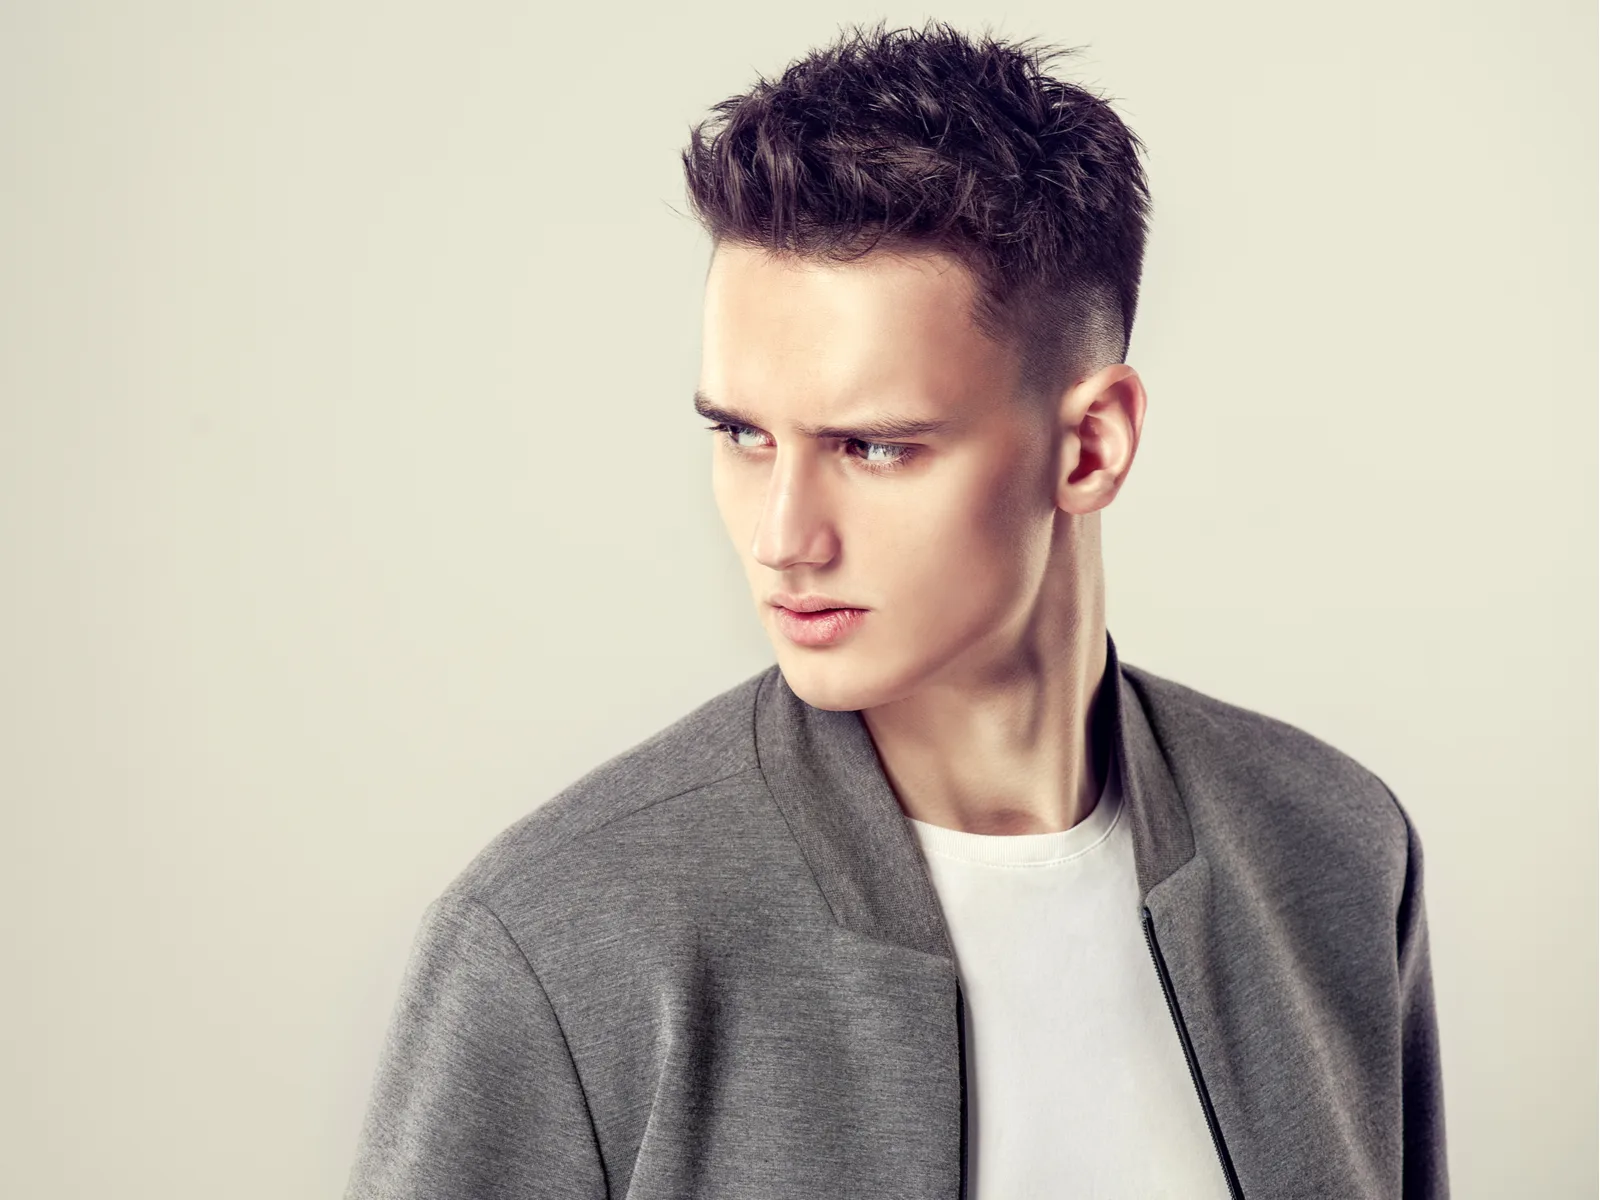 Spiked-Up Tapered Drop Fade Straight Hair Men's Hairstyle